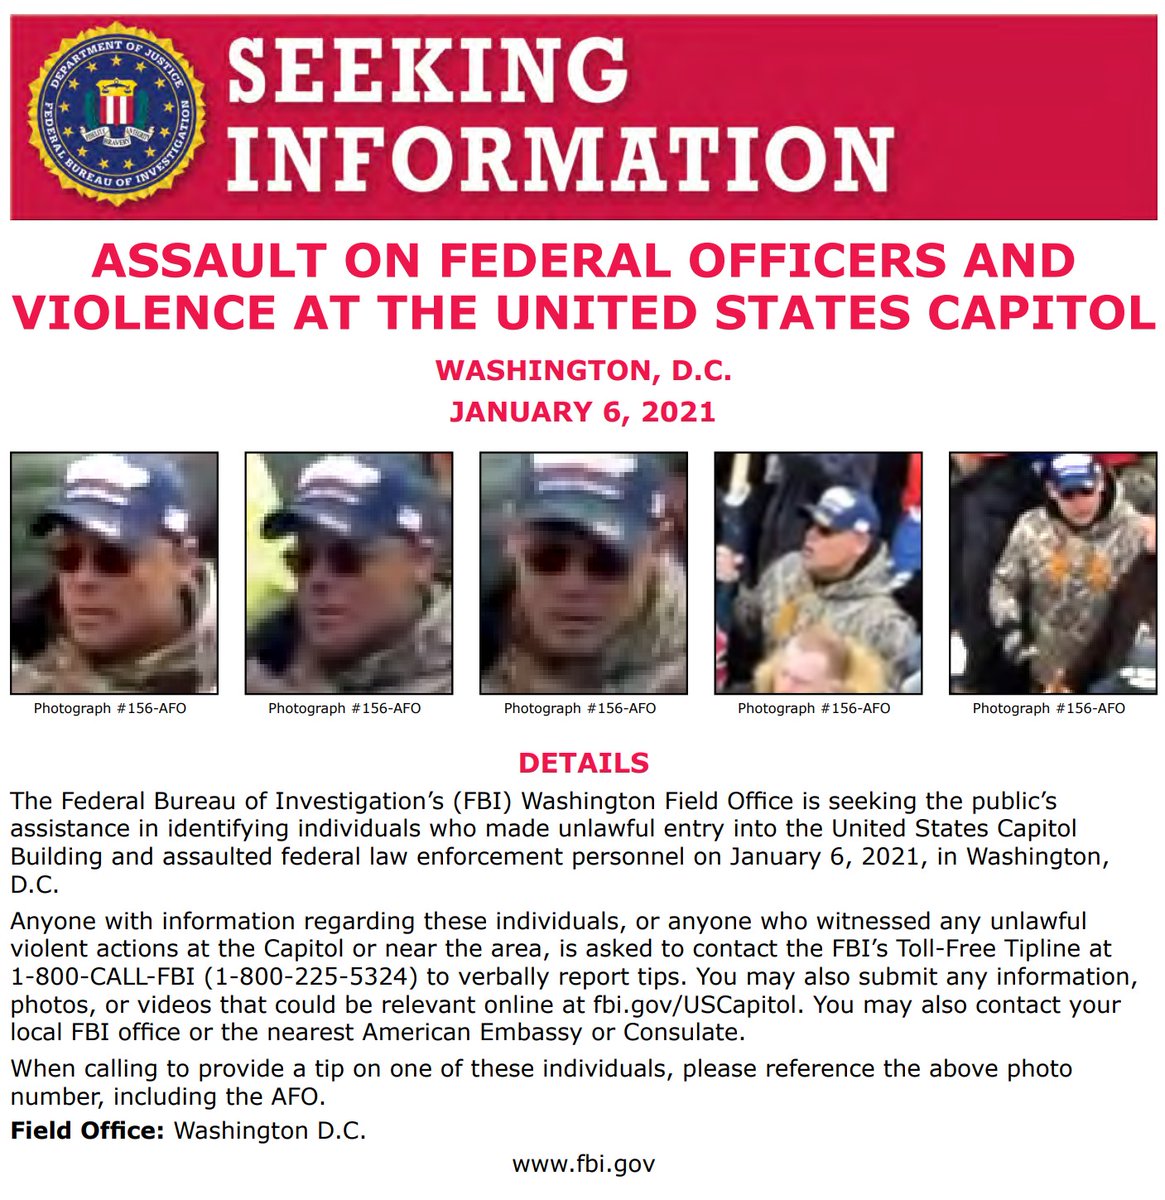 #ICYMI: #FBIWFO released 3 new Seeking Info posters w/ new images this weekend. #FBI is seeking the public’s help in identifying those who made unlawful entry & assaulted officers in the Capitol on Jan 6th. If you have info, call 1800CALLFBI or submit to tips.fbi.gov.